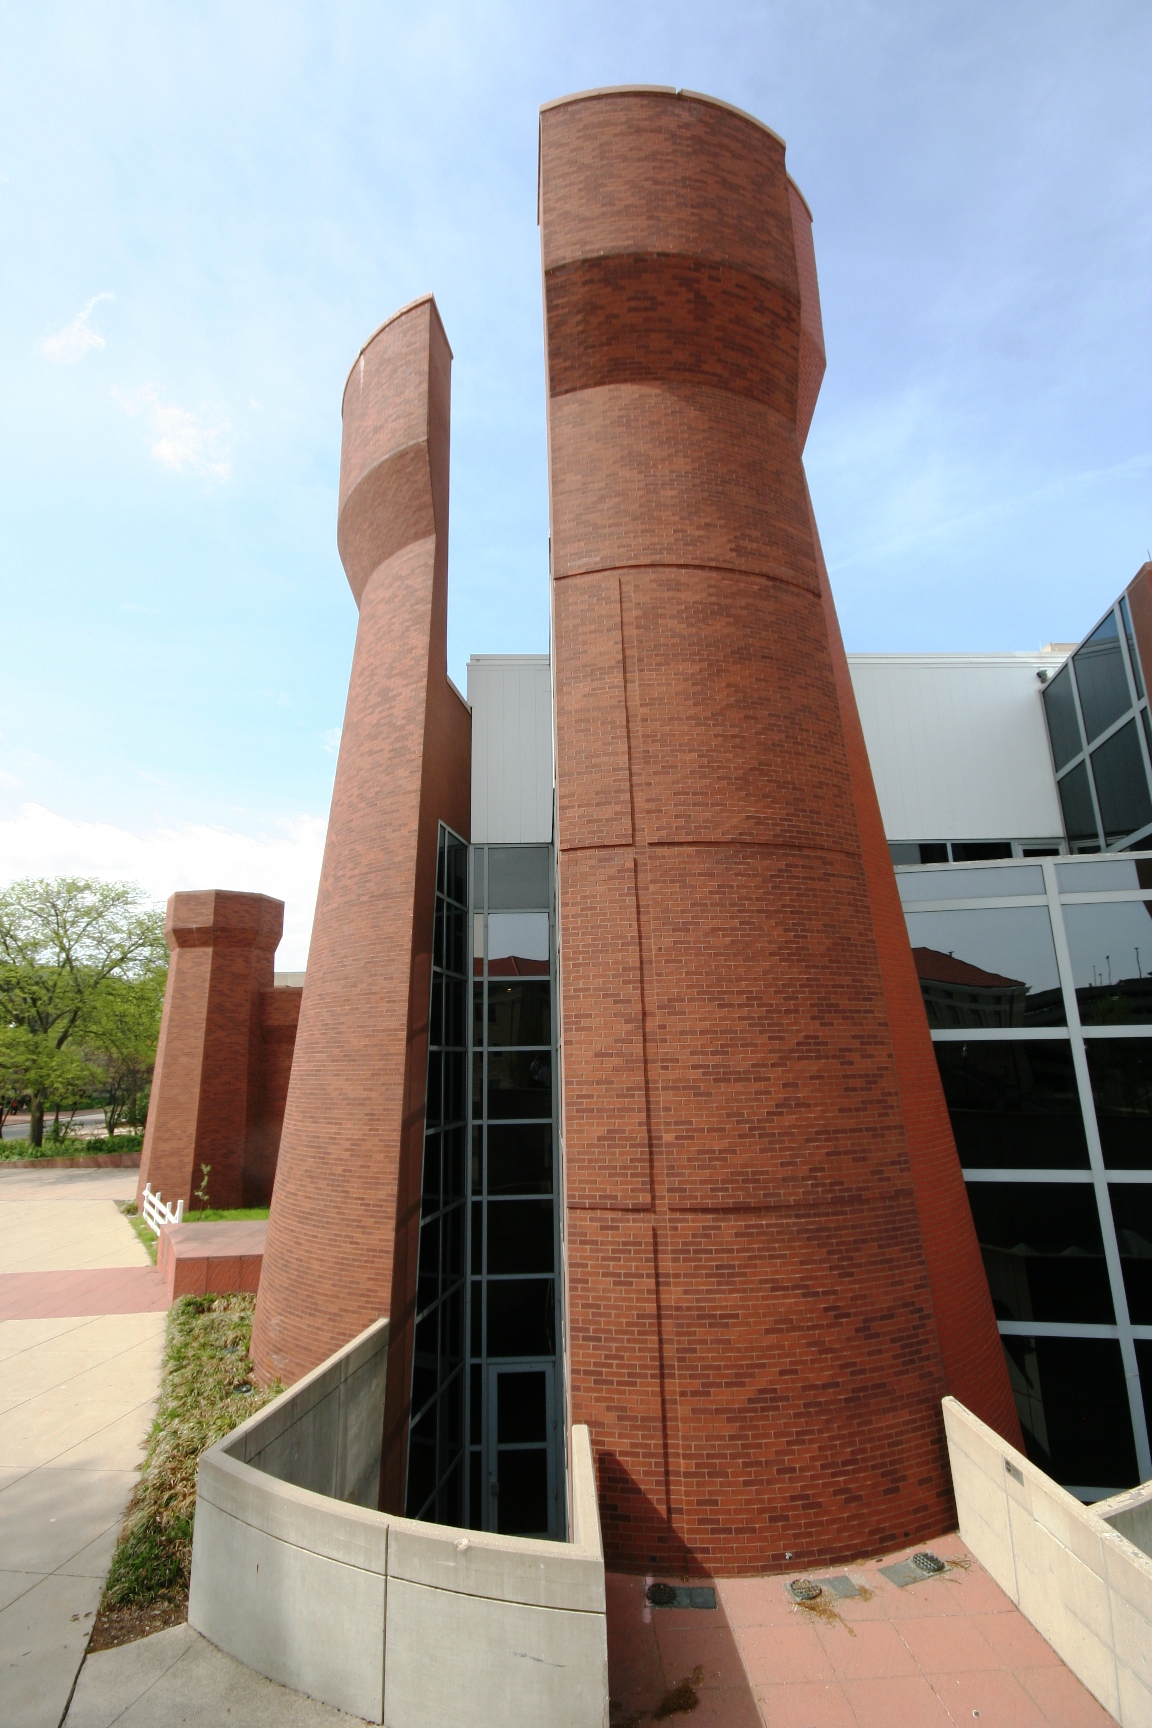 Image of wexner center turret